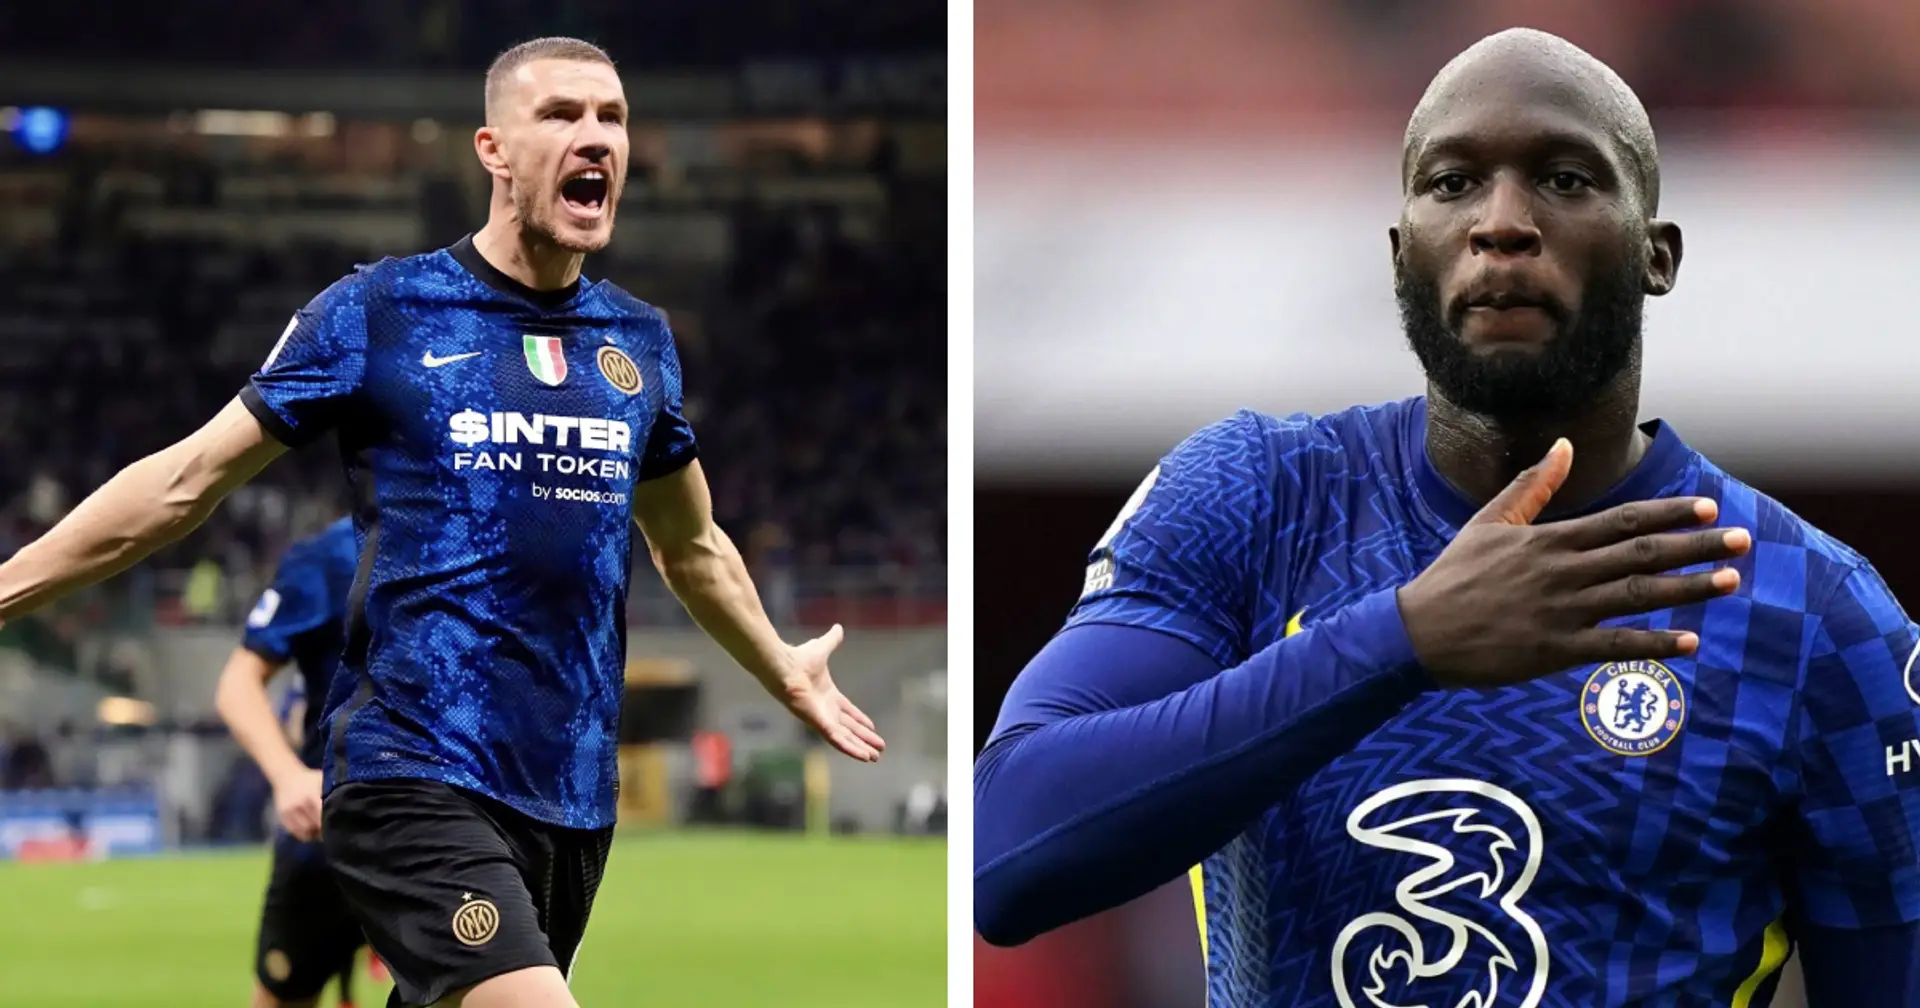 Inter CEO: "Lukaku was sold for €115m, Dzeko was free. On the pitch, there isn't much difference'